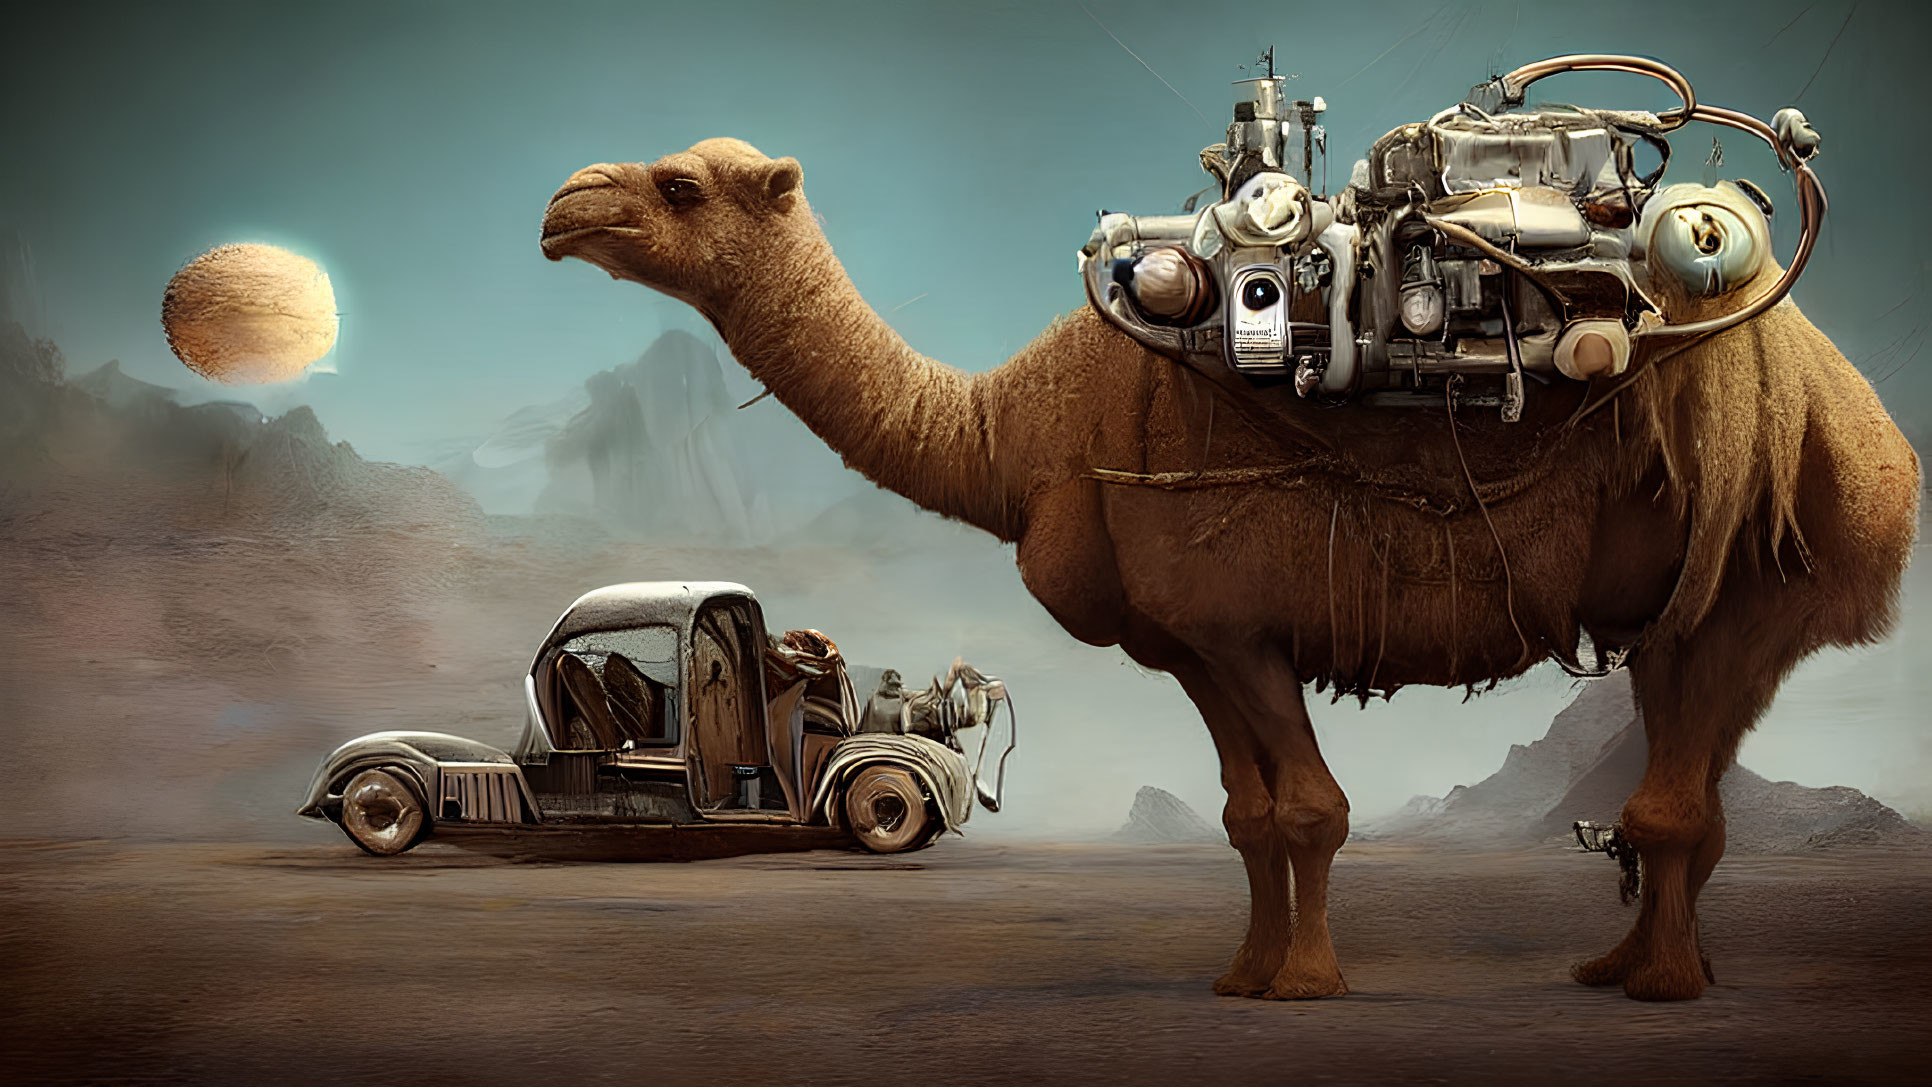 Mechanical camel and classic car under surreal moon in desert landscape